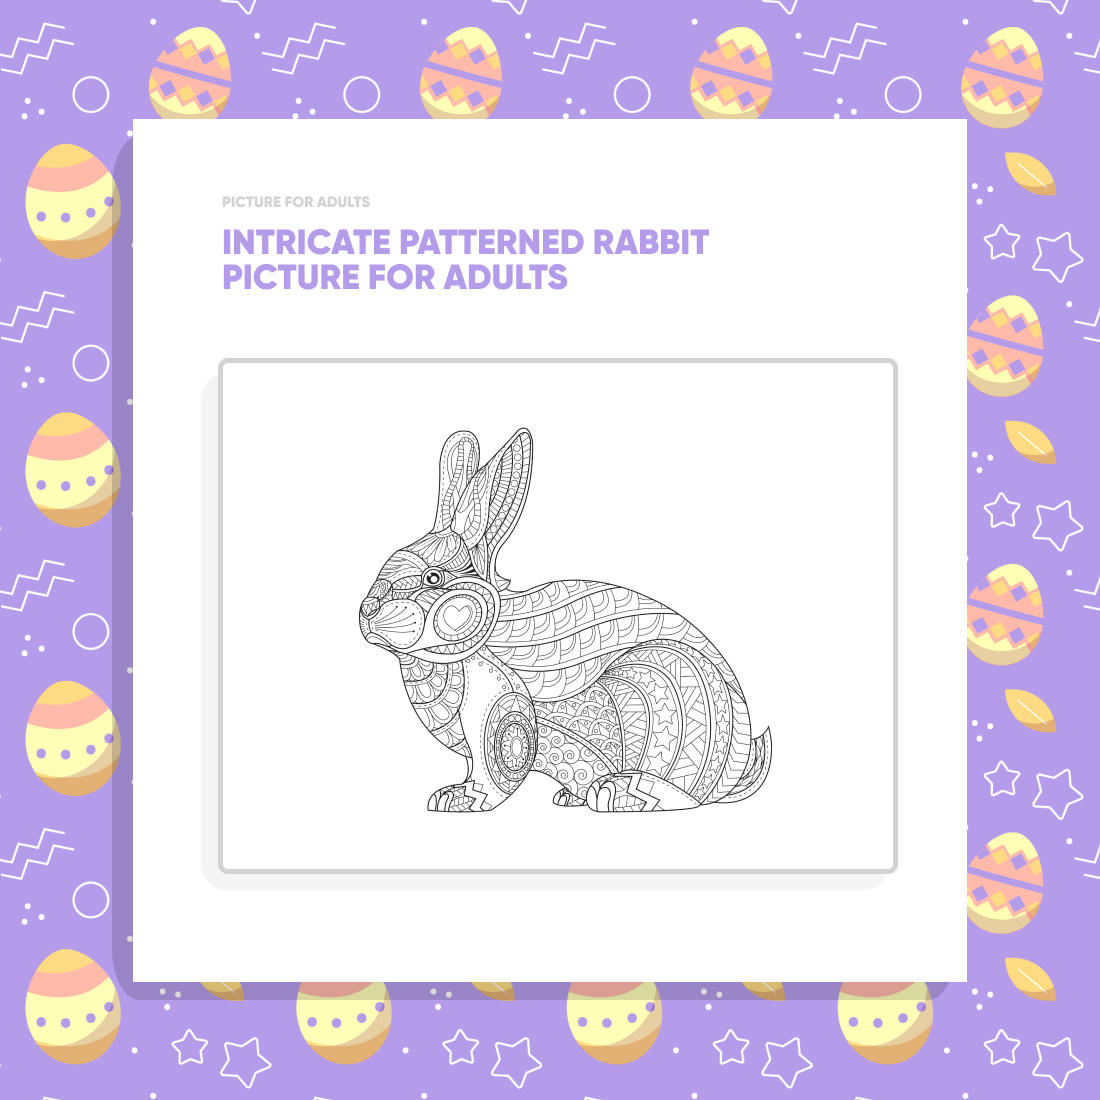 Intricate Patterned Rabbit Picture for Adults preview.